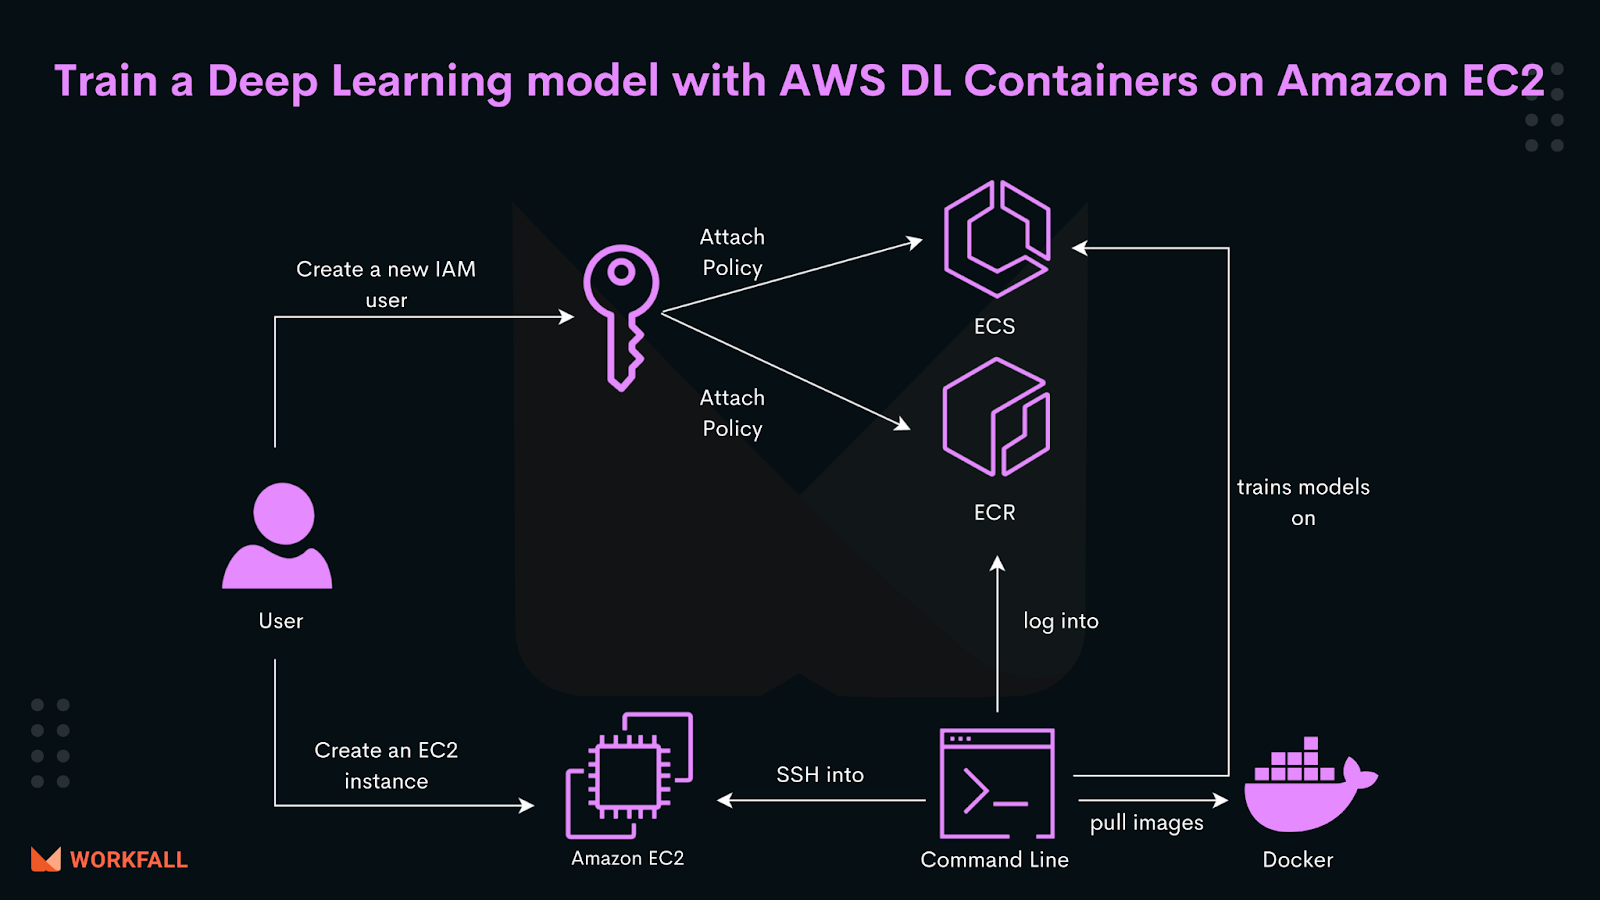 How to train a Deep Learning model with AWS Deep Learning Containers on Amazon EC2?